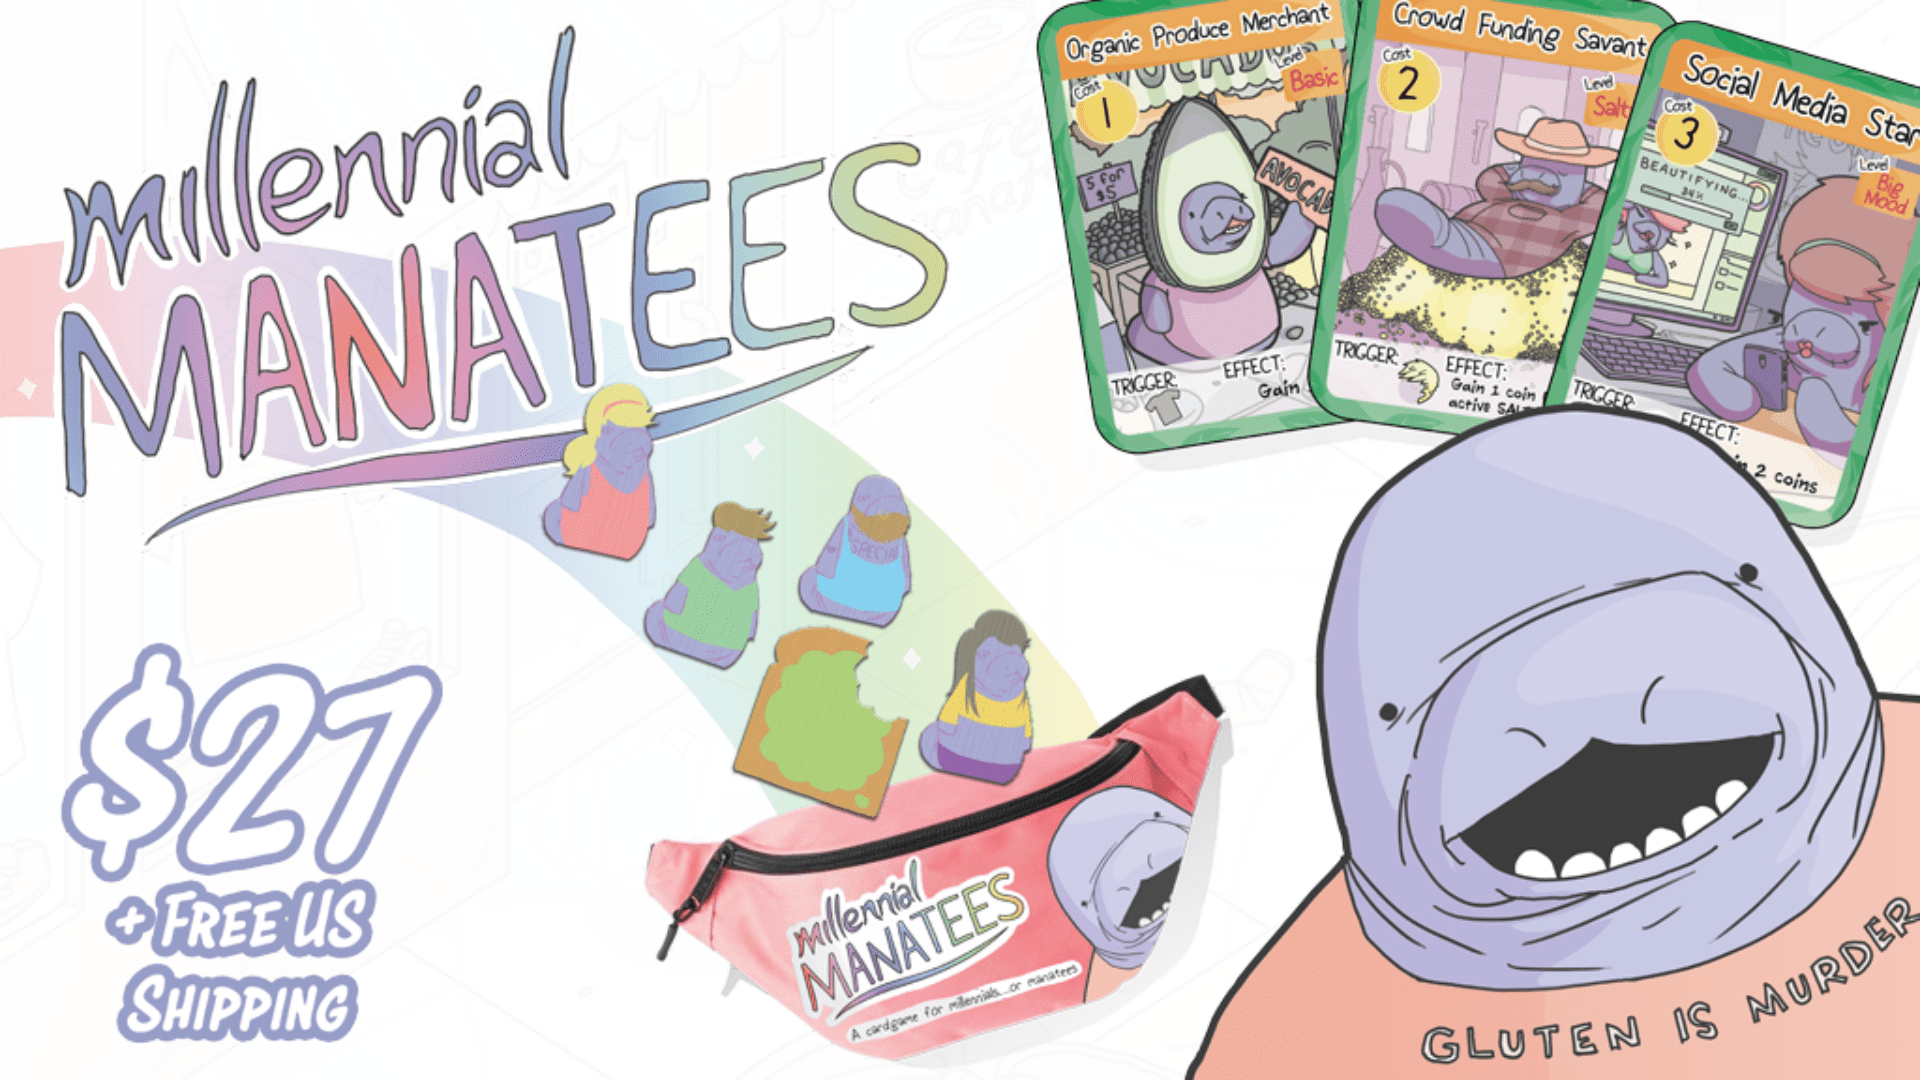 Pay Off Your Student Loans in The Next Big Casual Strategy Card Game Millennial Manatees